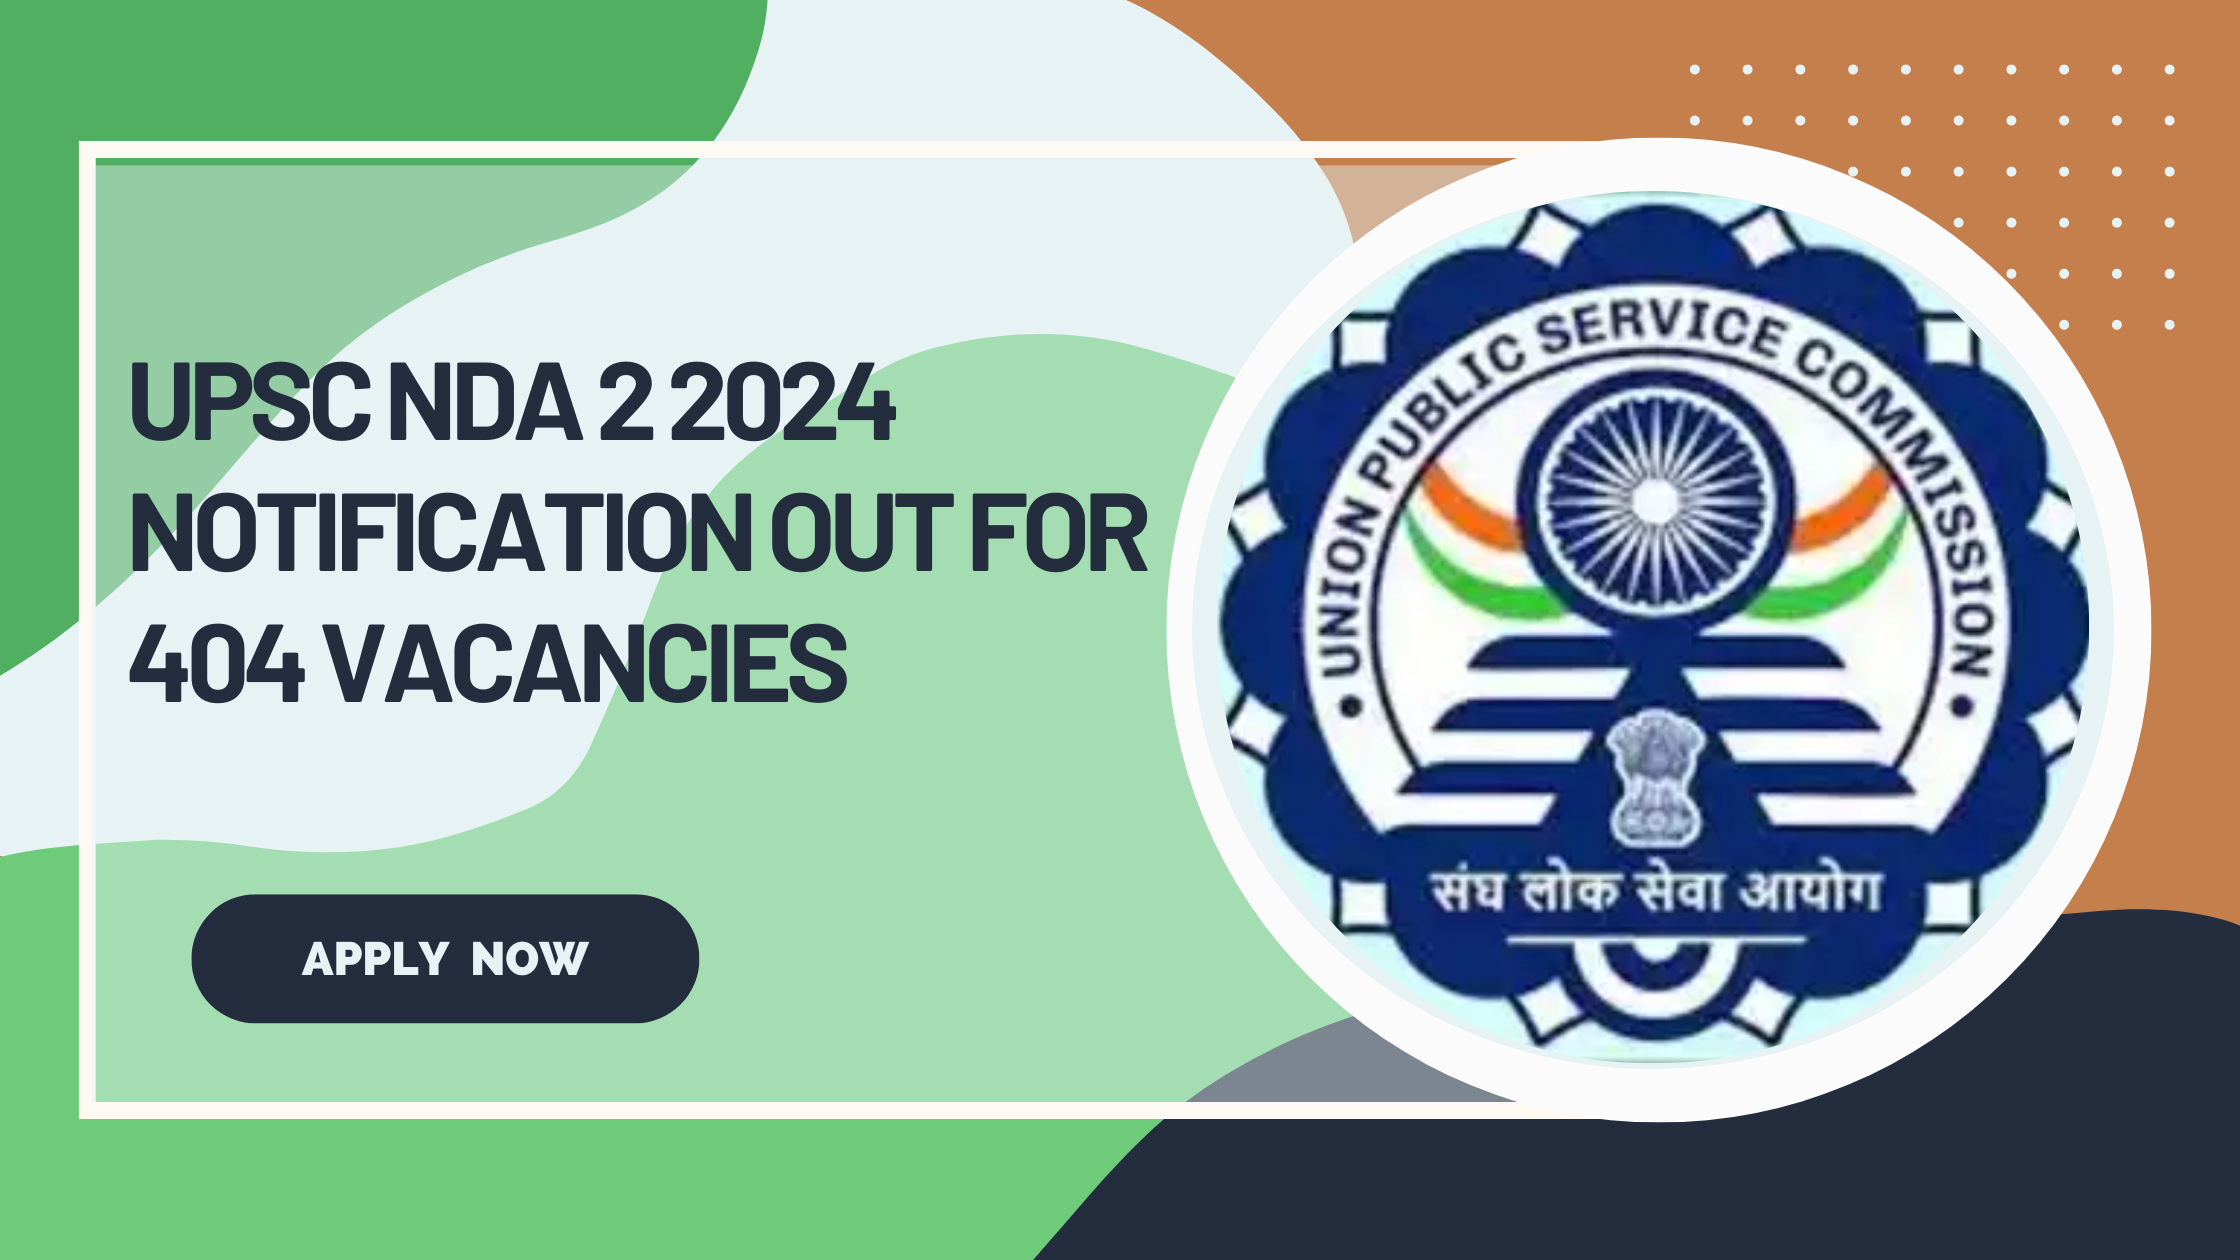 NDA 2 2024 Notification Out for 404 Vacancies: Apply Online, Check Eligibility, Selection Process